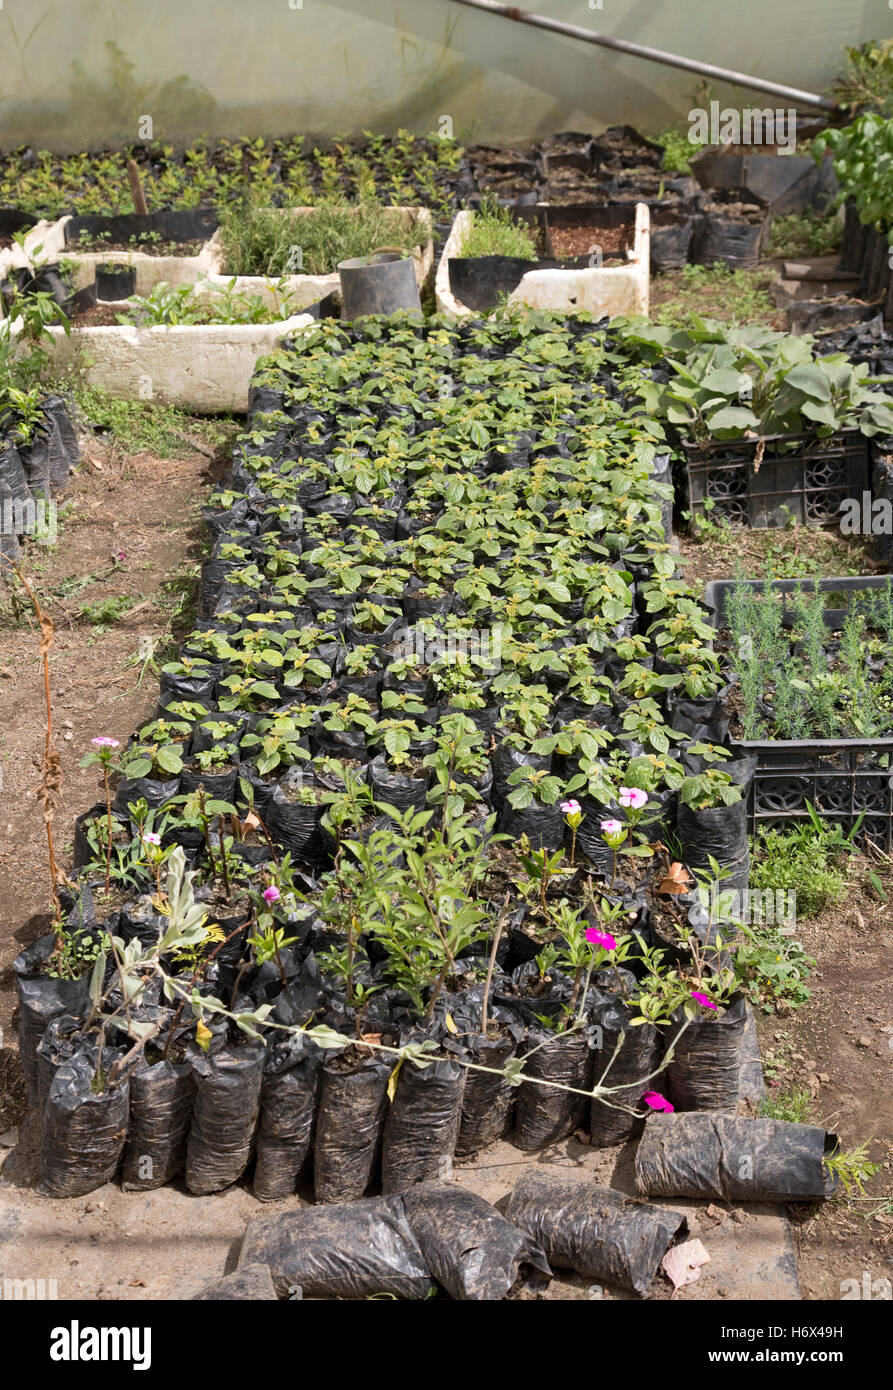 Young decorative garden plants cultivated for sale Longonot Horticulture Ltd Naivasha Kenya Stock Photo